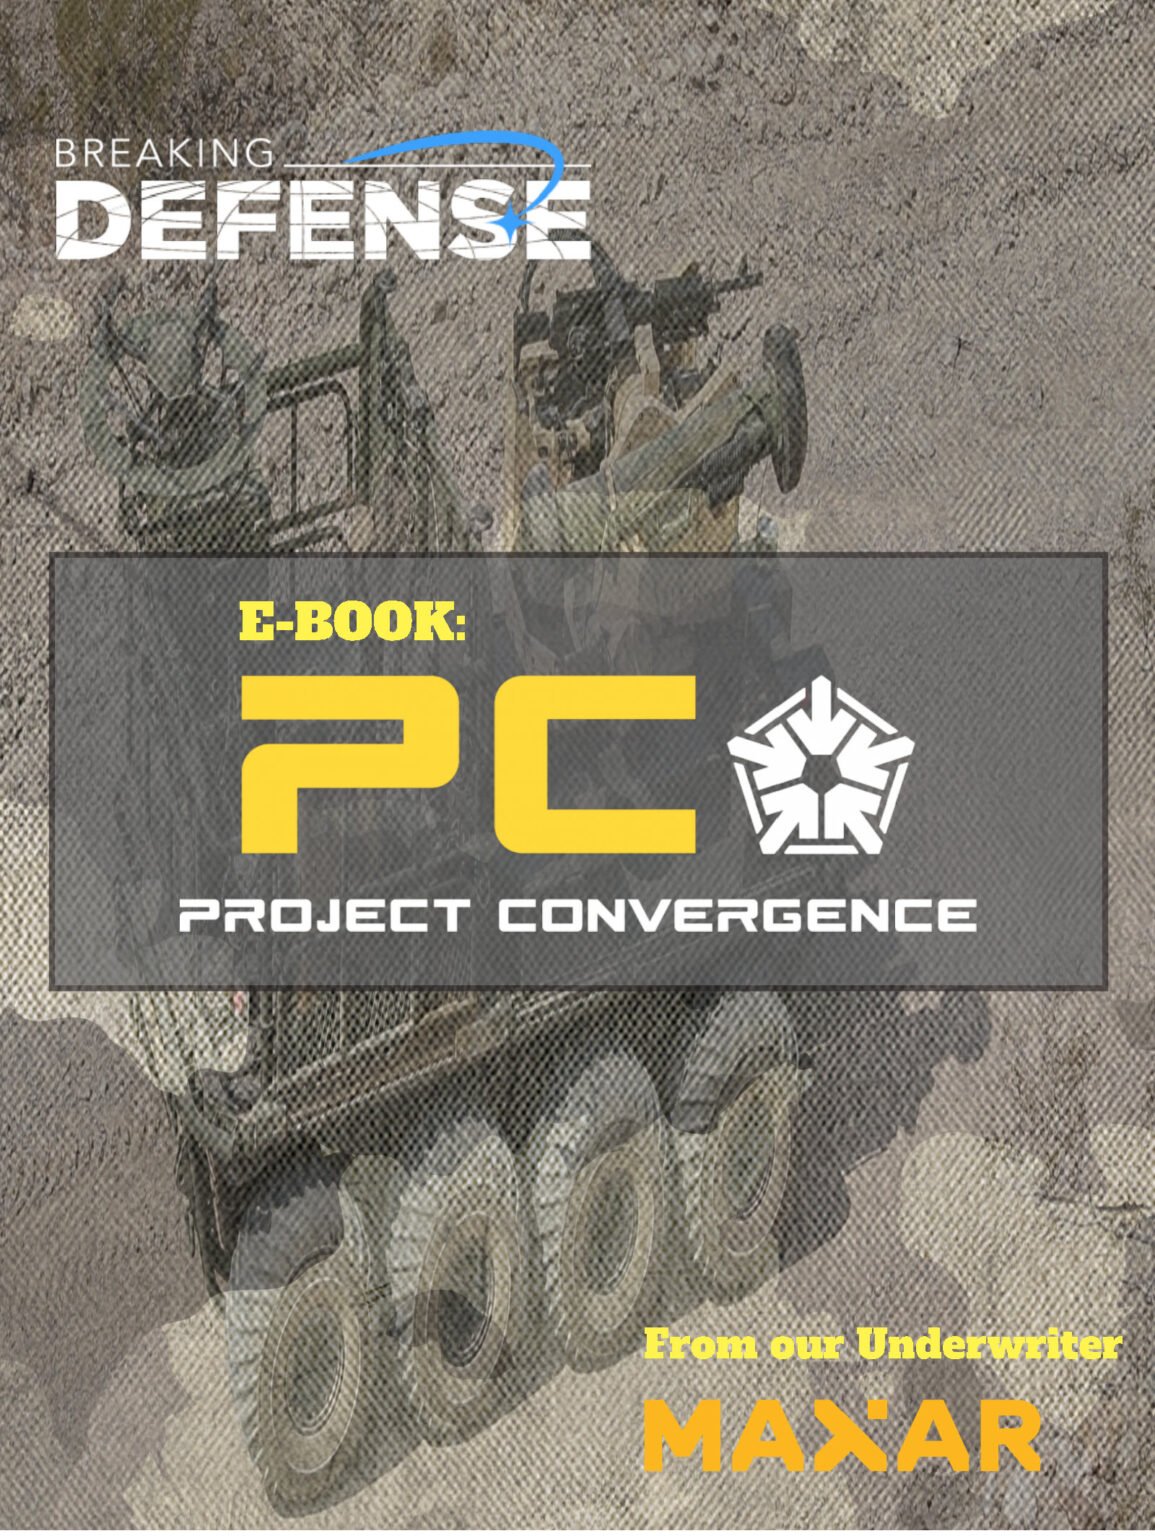 Download our Project Convergence eBook Breaking Defense